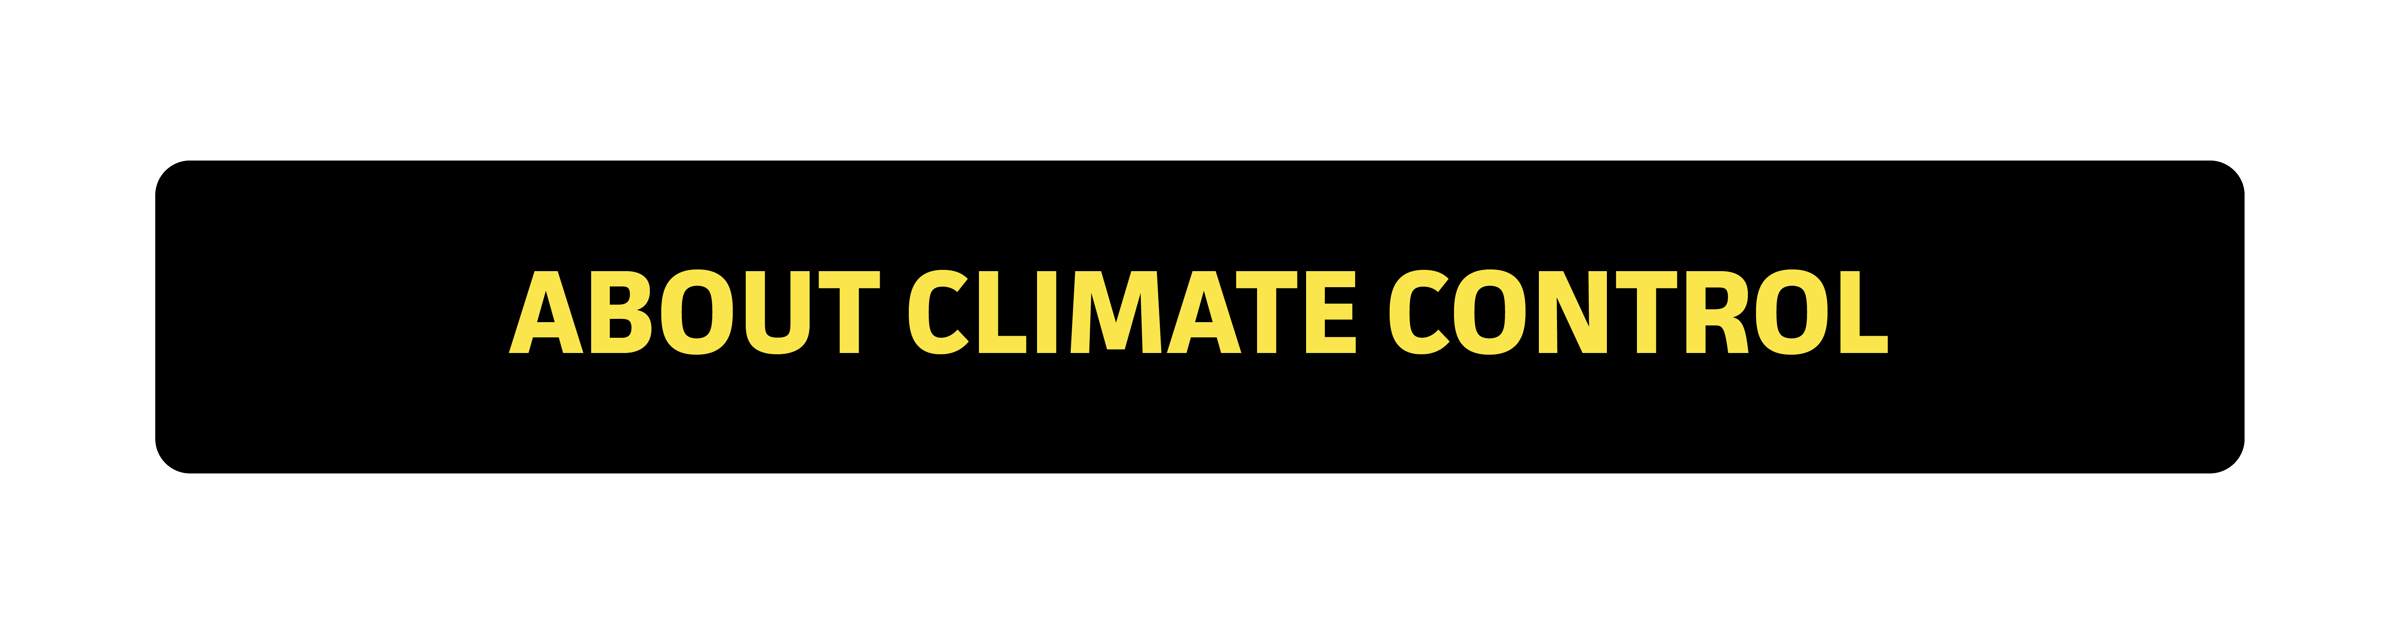 About Climate Control